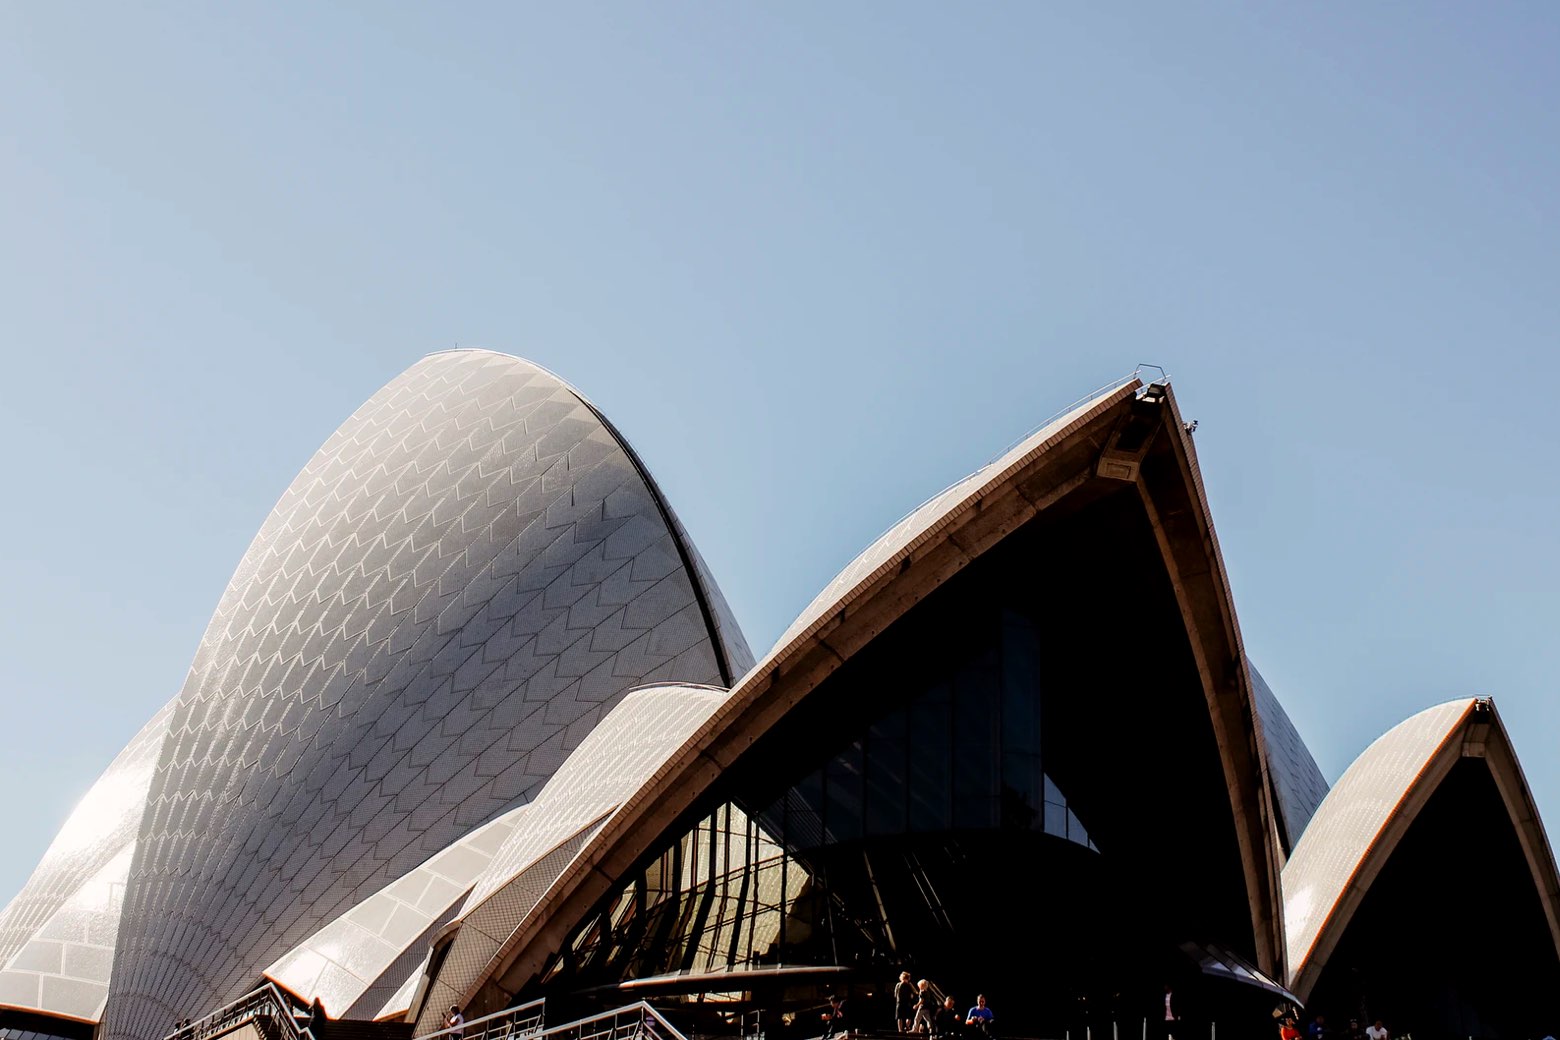 An artistic photo of the Sydney Opera House